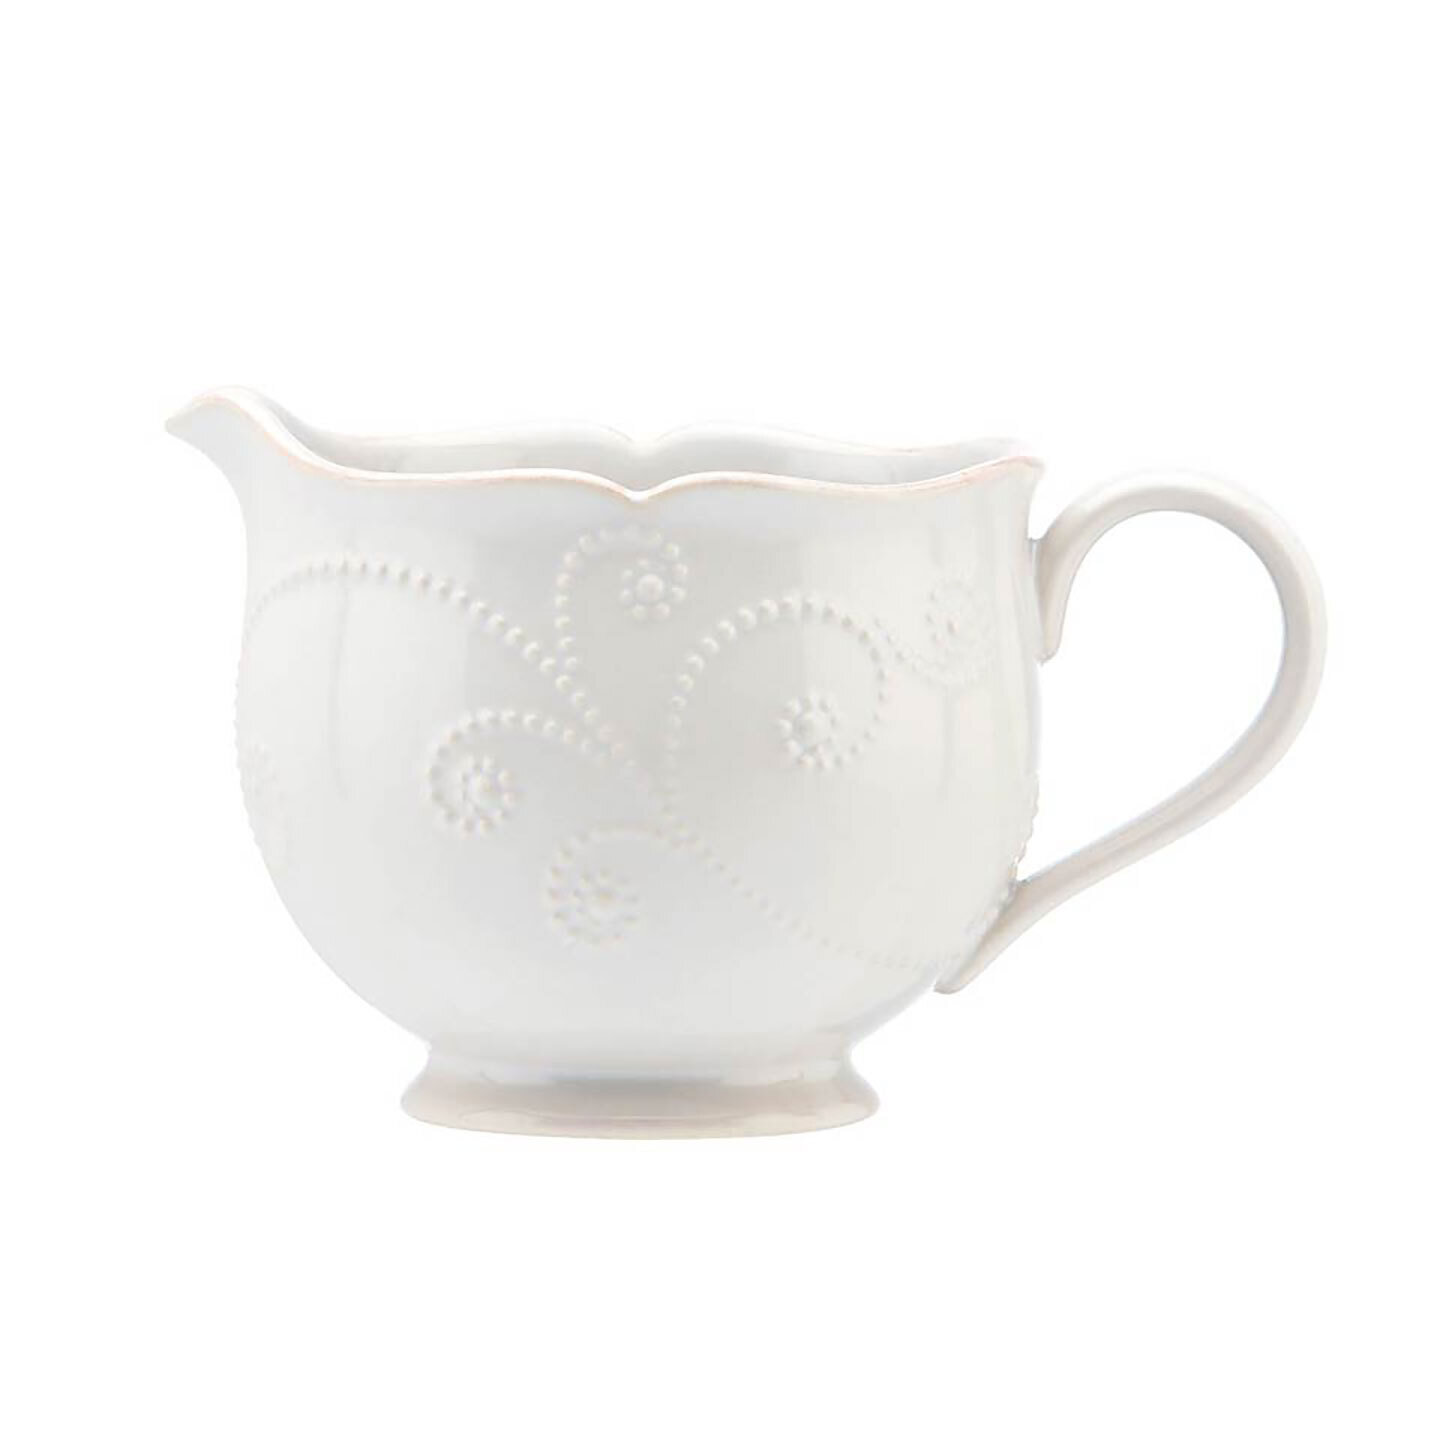 Lenox French Perle White Sauce Pitcher 824747